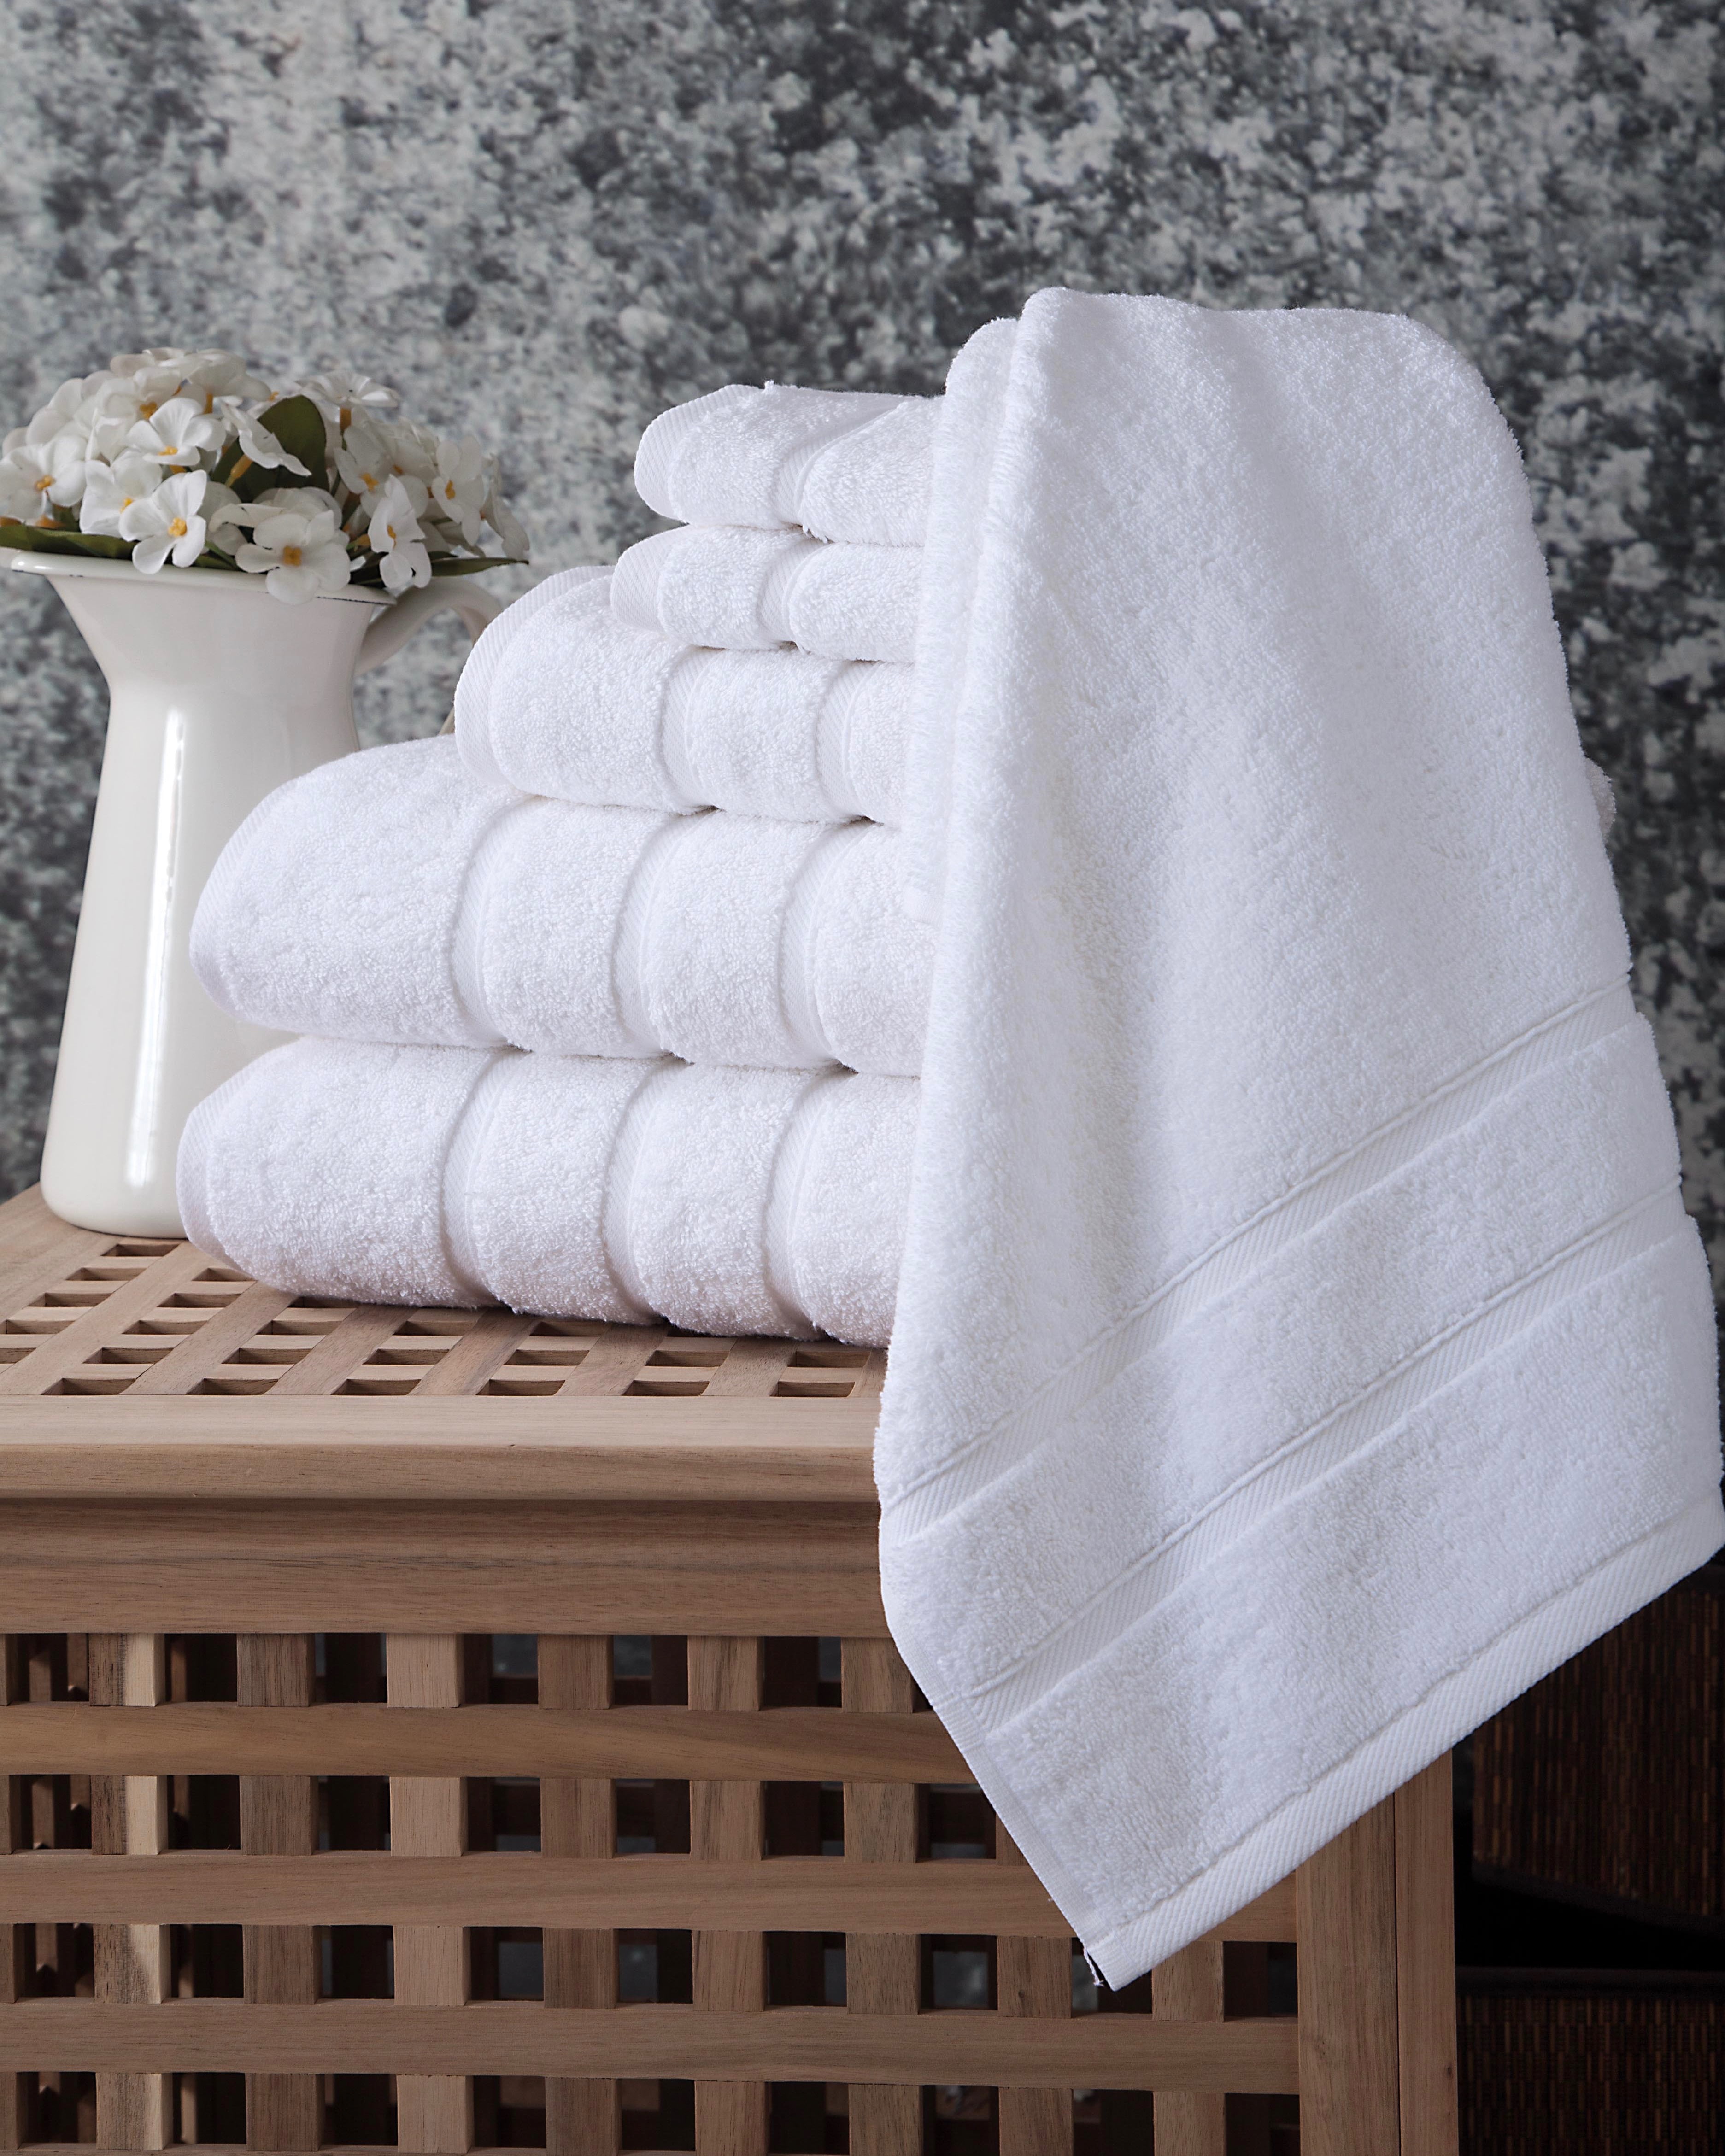 Luxury 100% Turkish Cotton Microfibre Bath Towel Set Extra Large Size For  Home, Beach, And Spa Cleaning From Gandolfi, $35.66